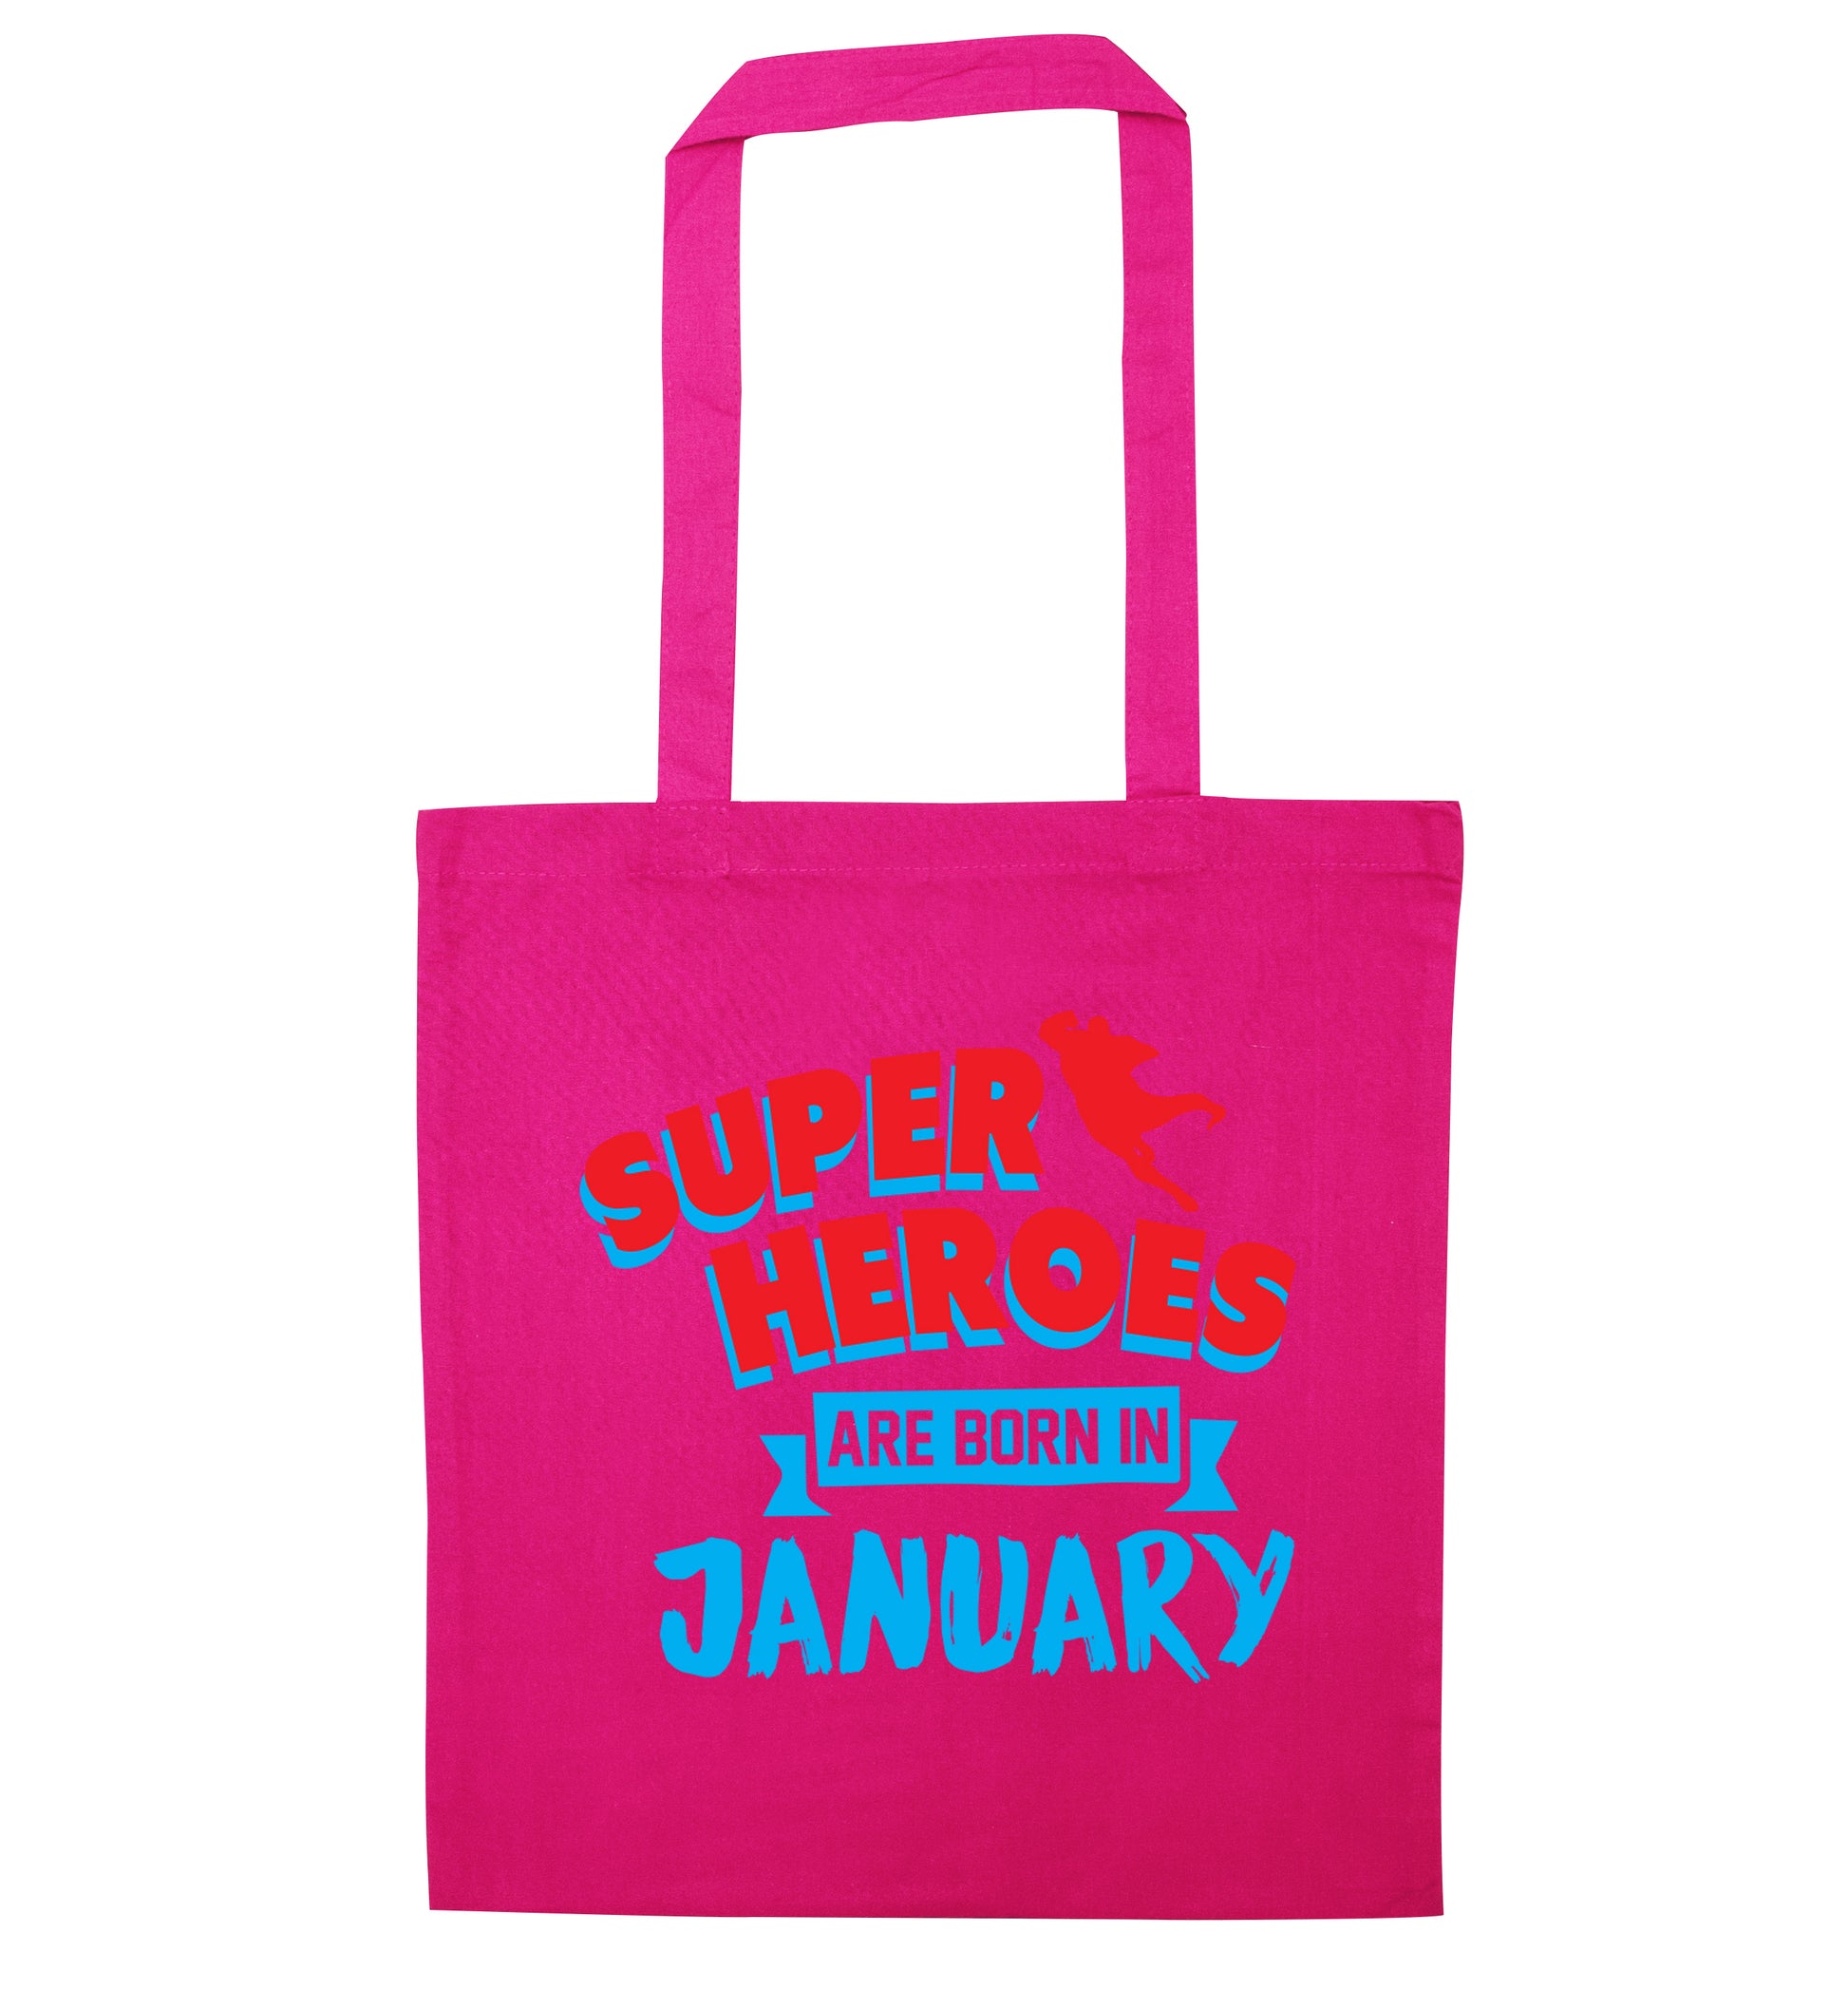 Superheros are born in January pink tote bag